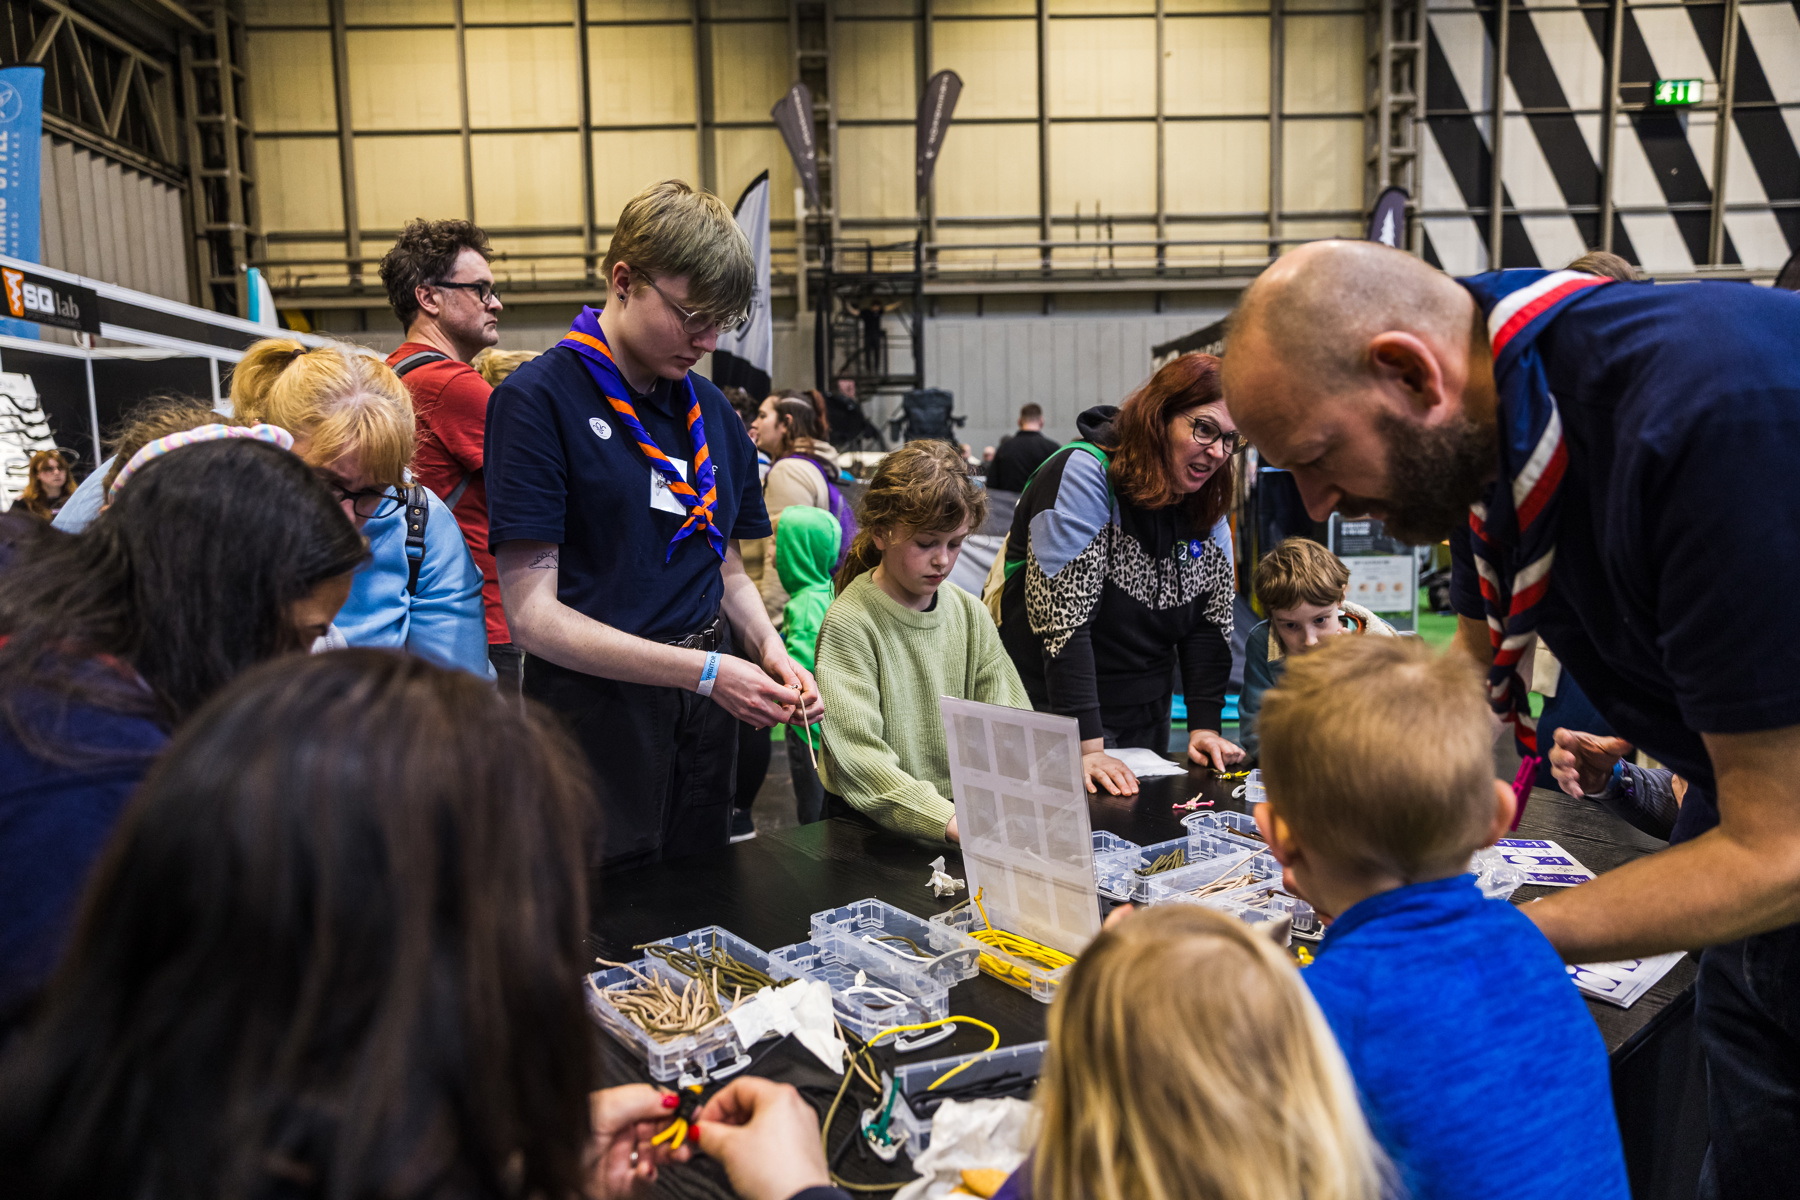 Scouts and young people standing around a table making paracord crafts at The National Outdoor Expo